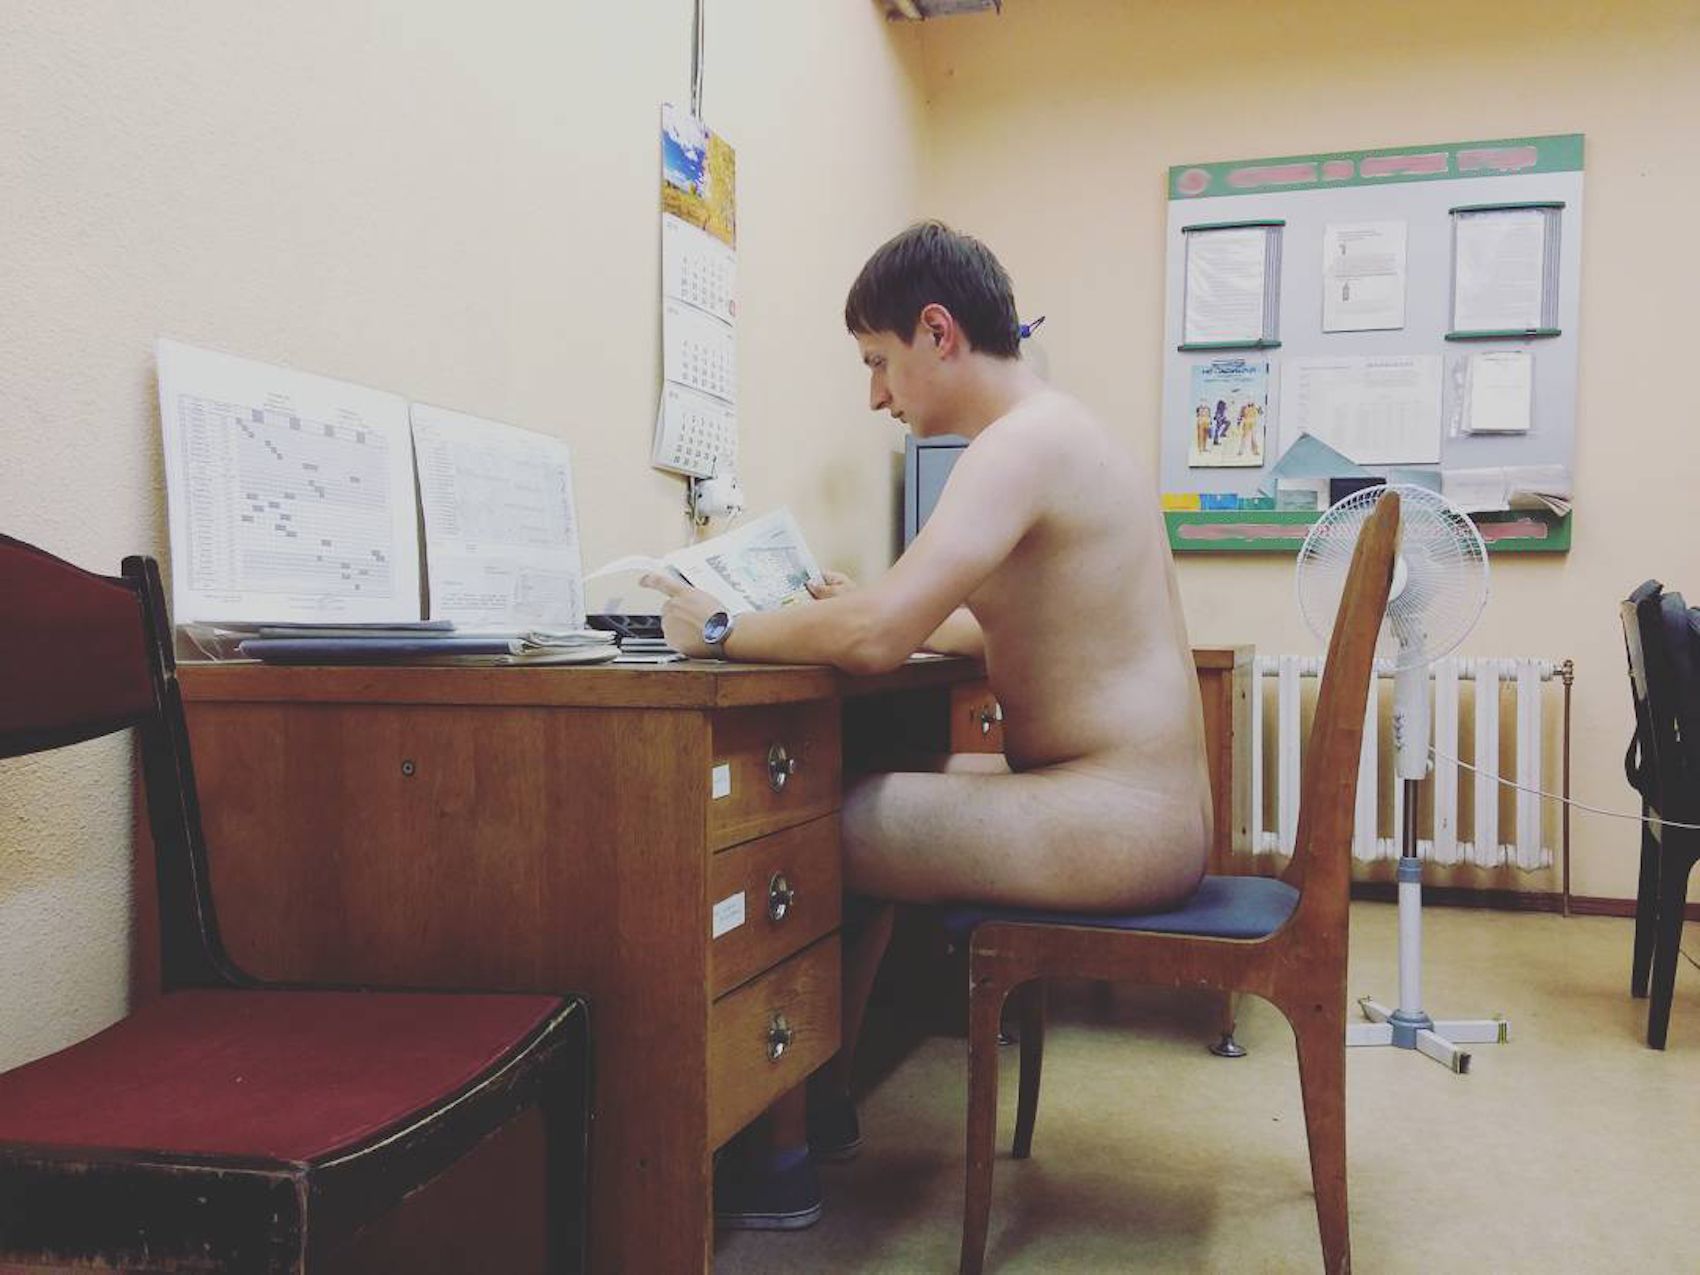 Belarusians are getting naked at work | CNN